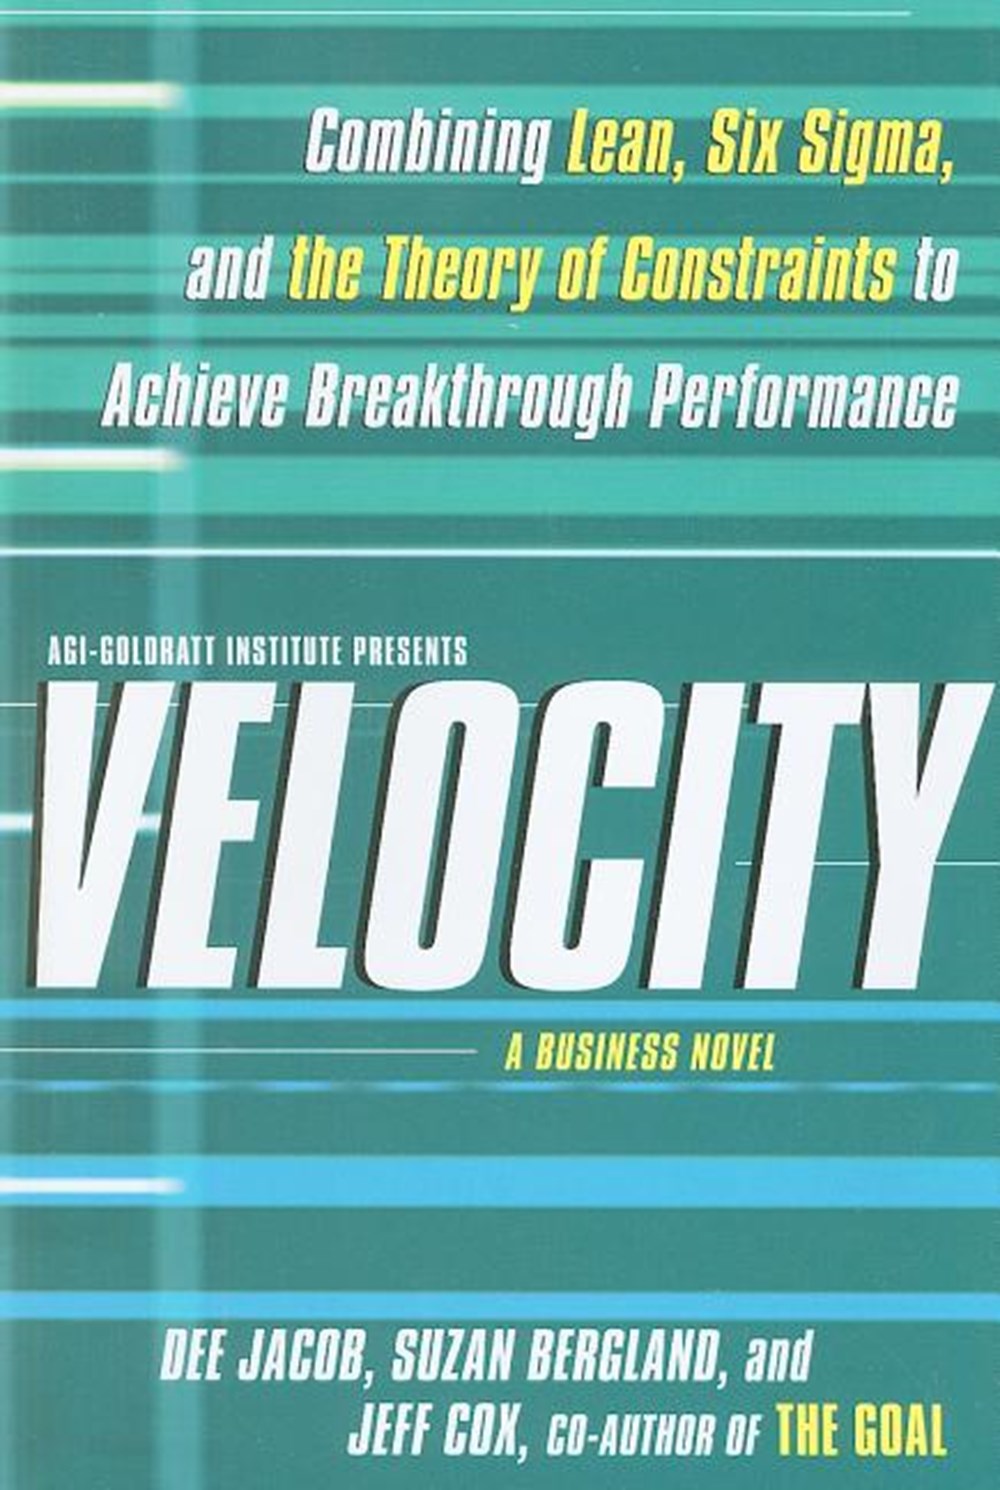 Velocity Combining Lean, Six SIGMA, and the Theory of Constraints to Accelerate Business Improvement